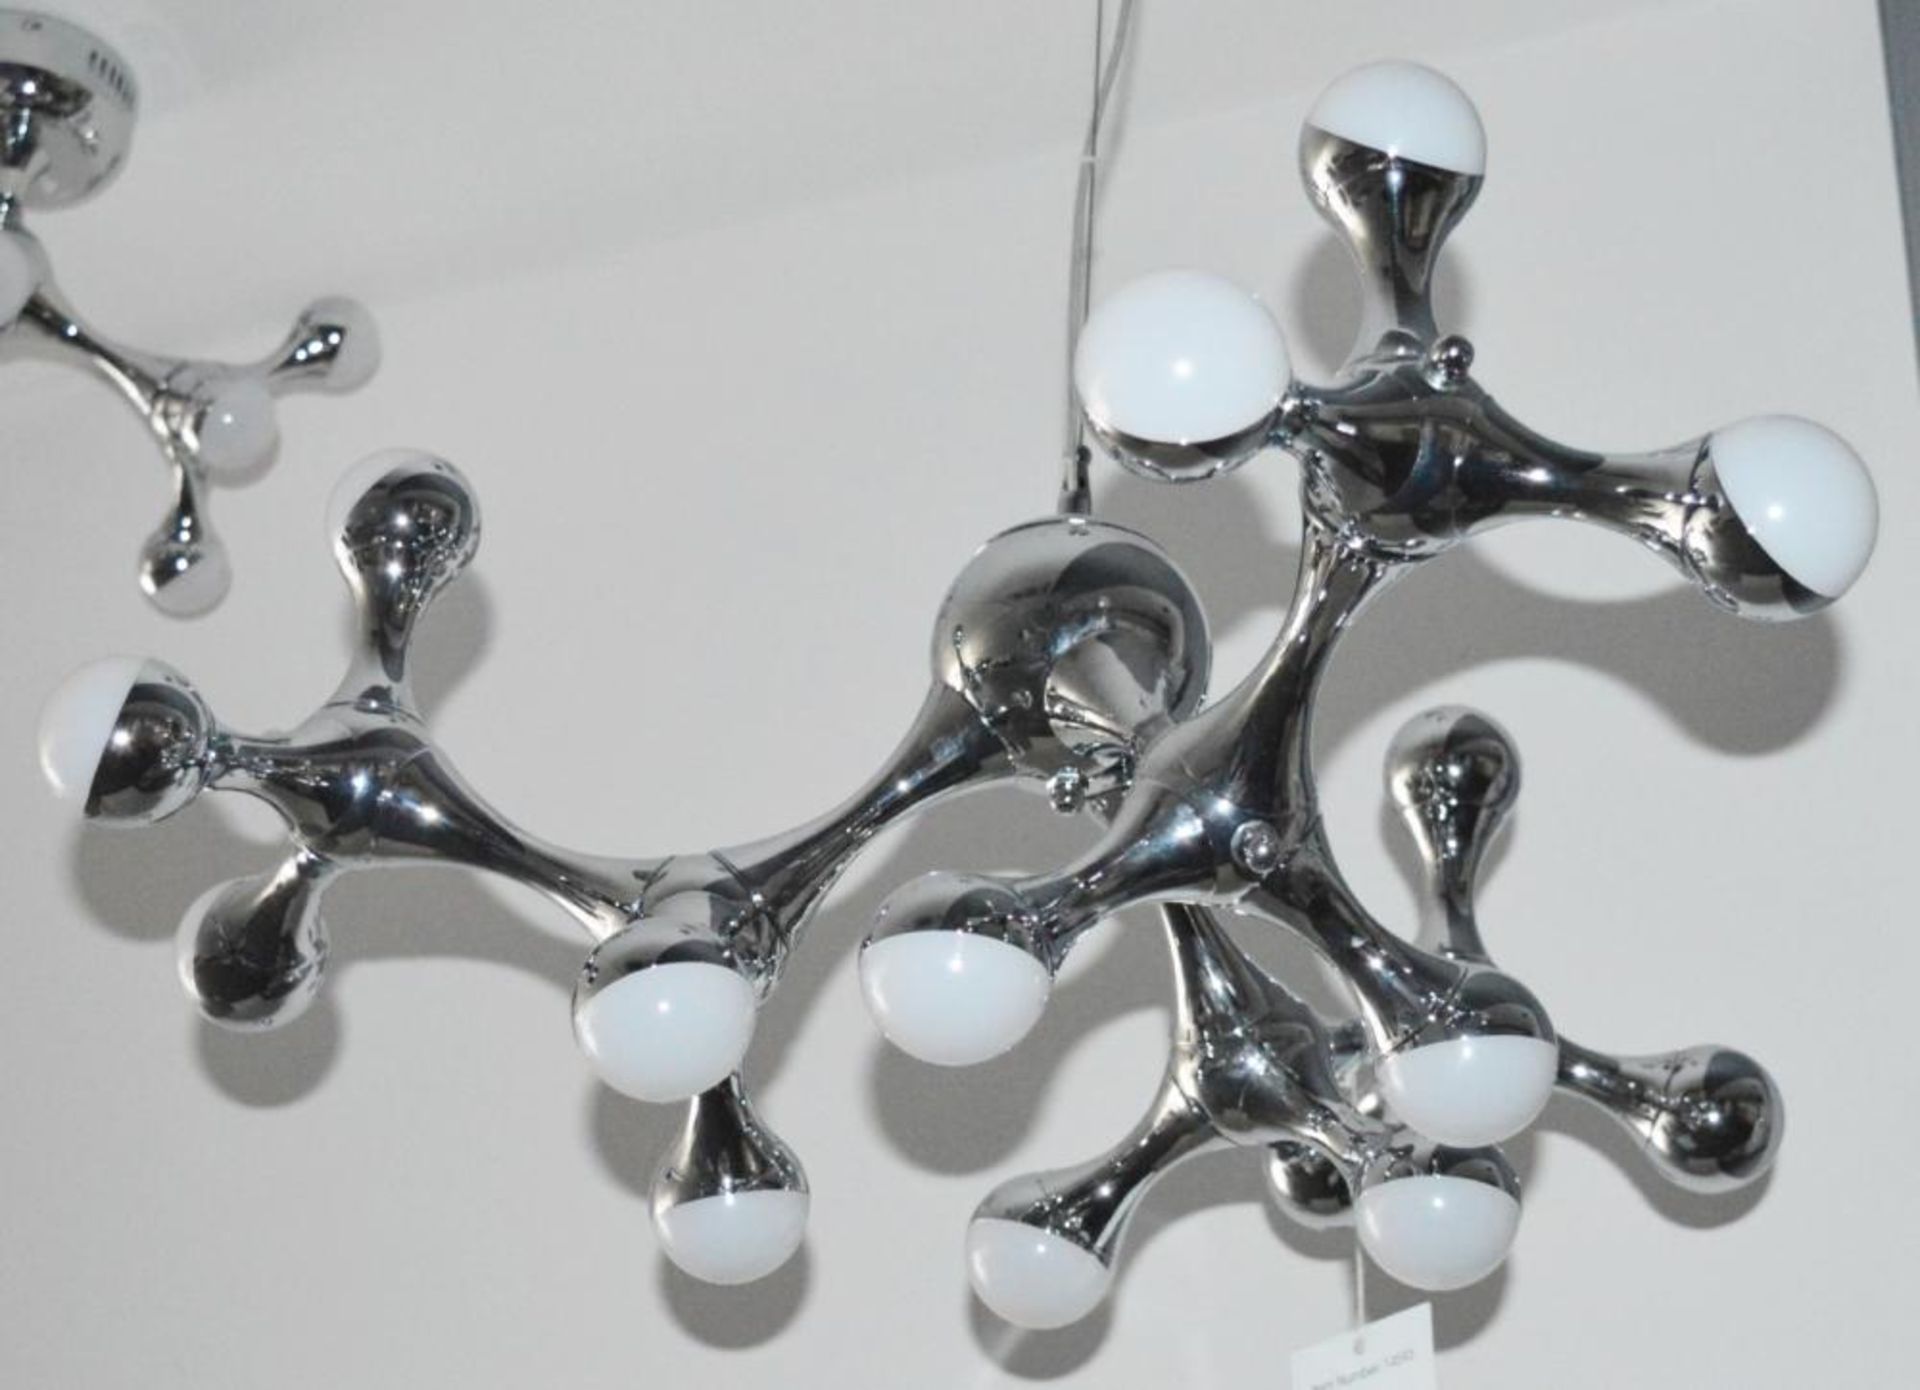 1 x DNA Chrome 15 LED Ceiling Light With Half Dome Shades - Contemporary European Design - Inspired - Image 4 of 6